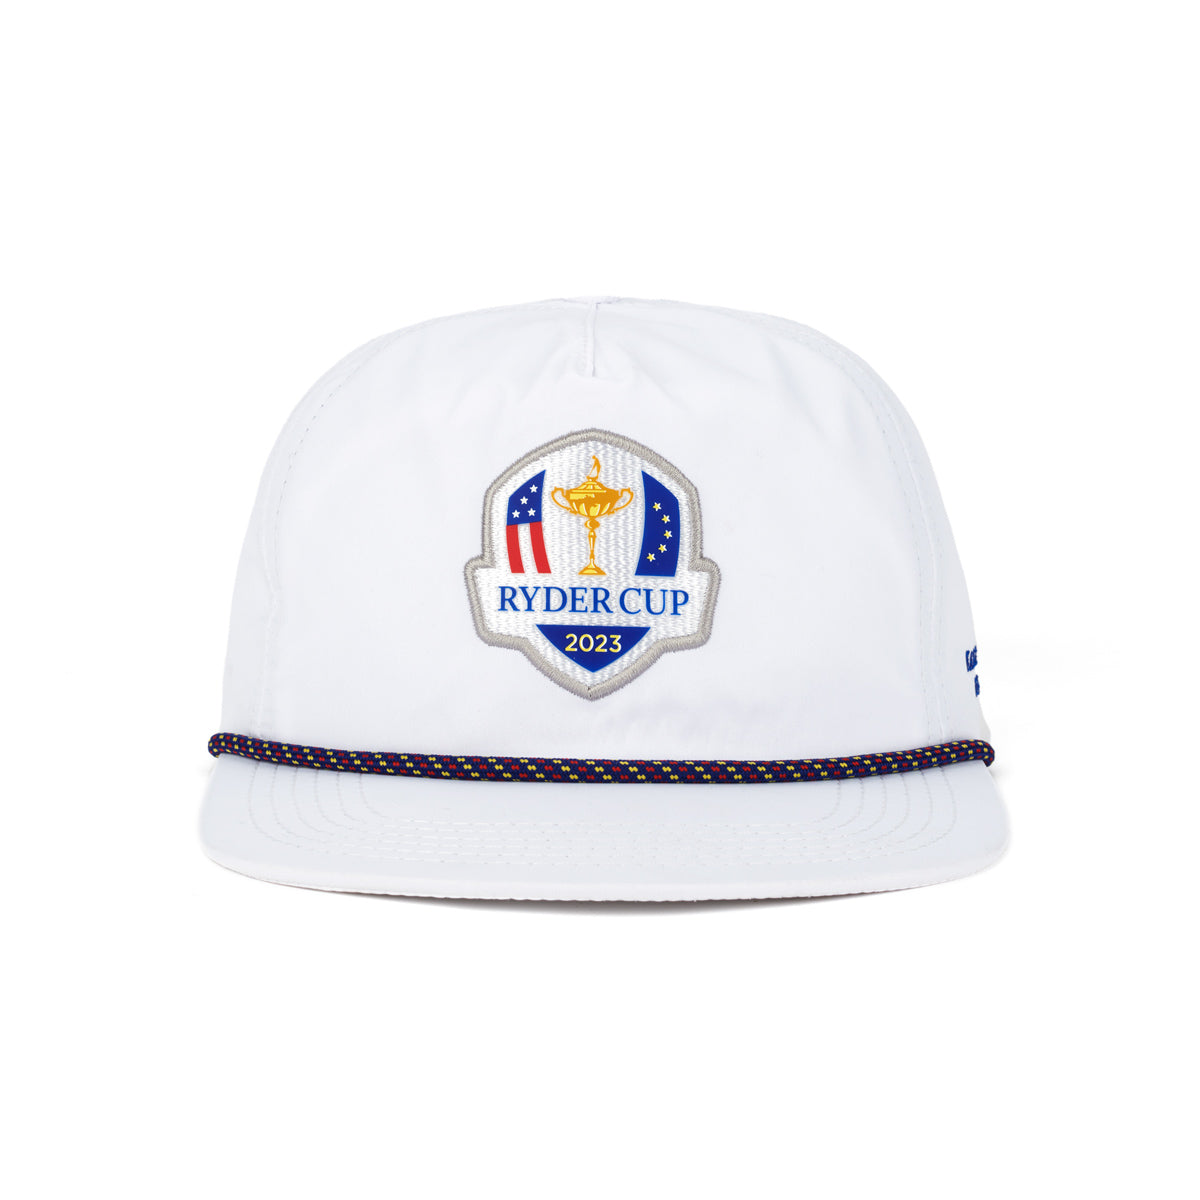 Barstool Golf x Ryder Cup Trophy Rope Hat-Hats-Fore Play-White-One Size-Barstool Sports